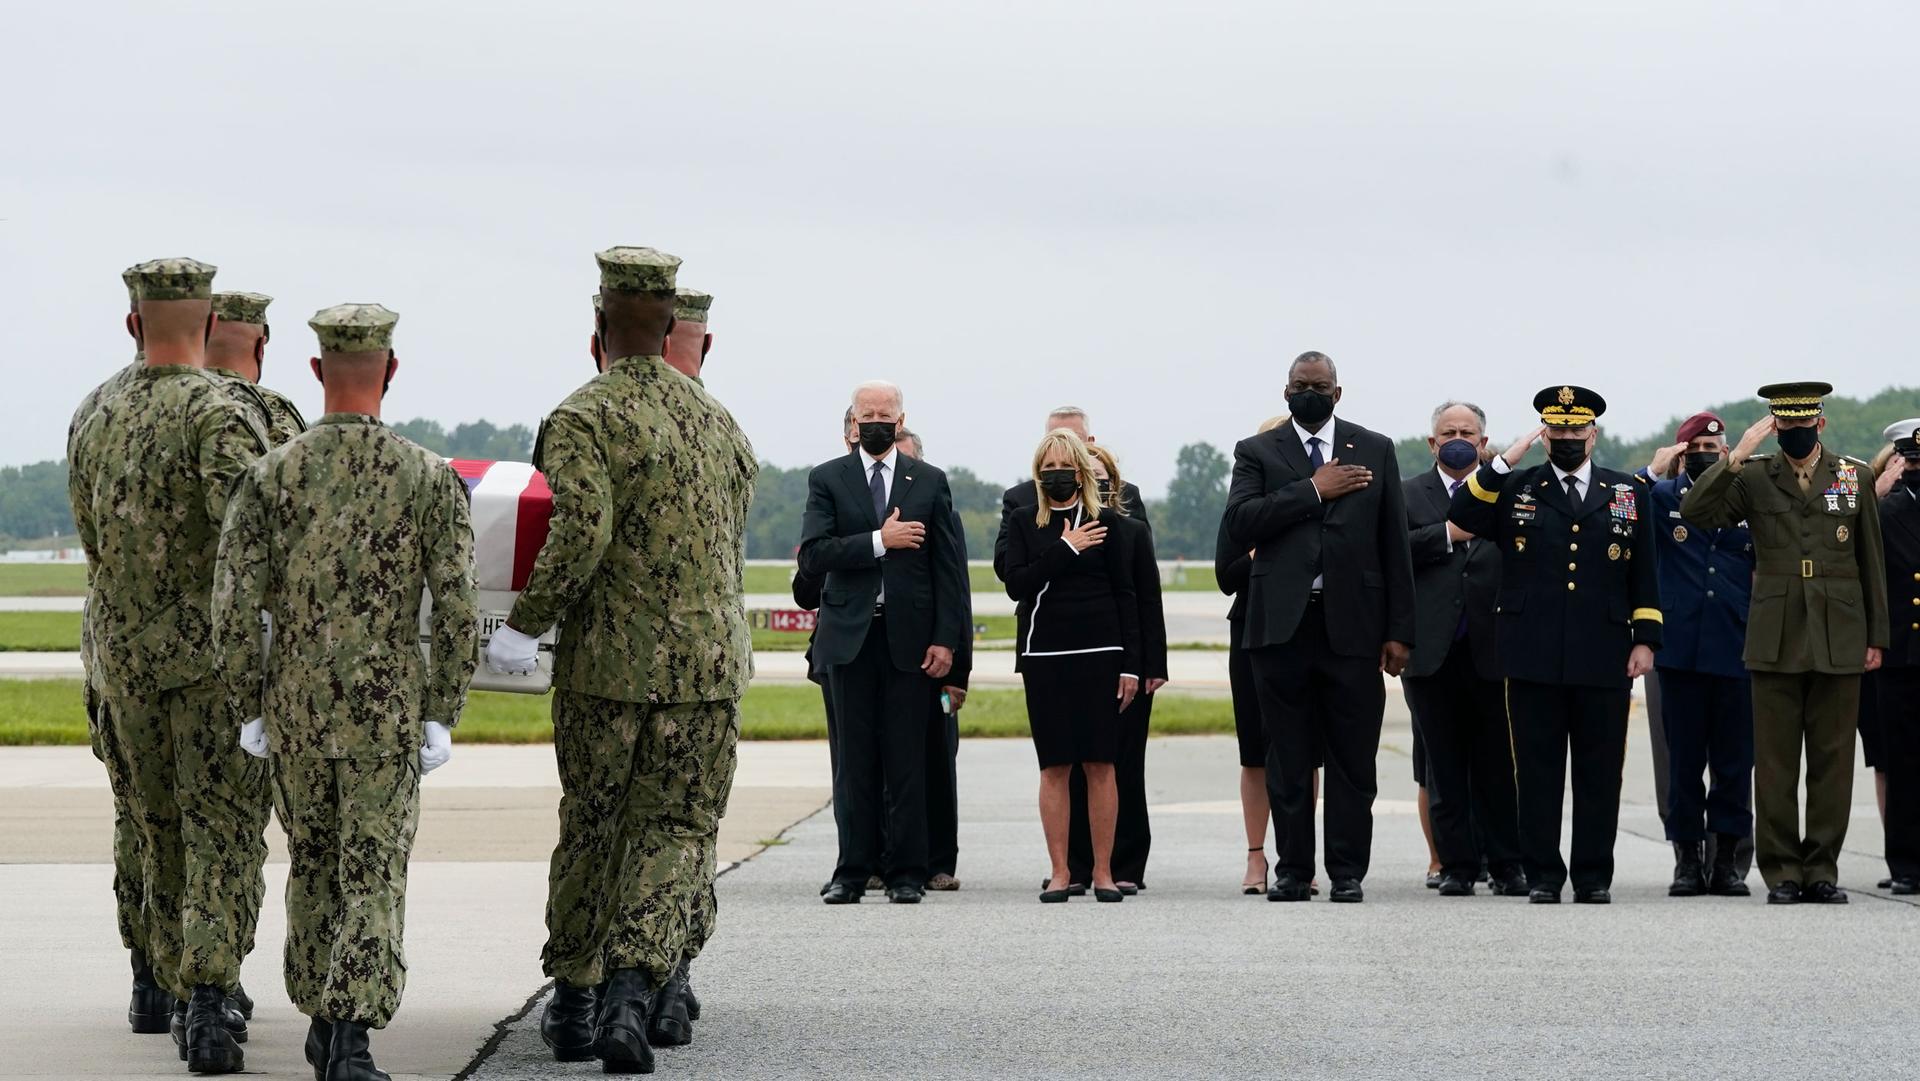 A group of military personel are shown carrying a flag-drapped coffin and walking toward US President Joe Biden and other cabinet officials.